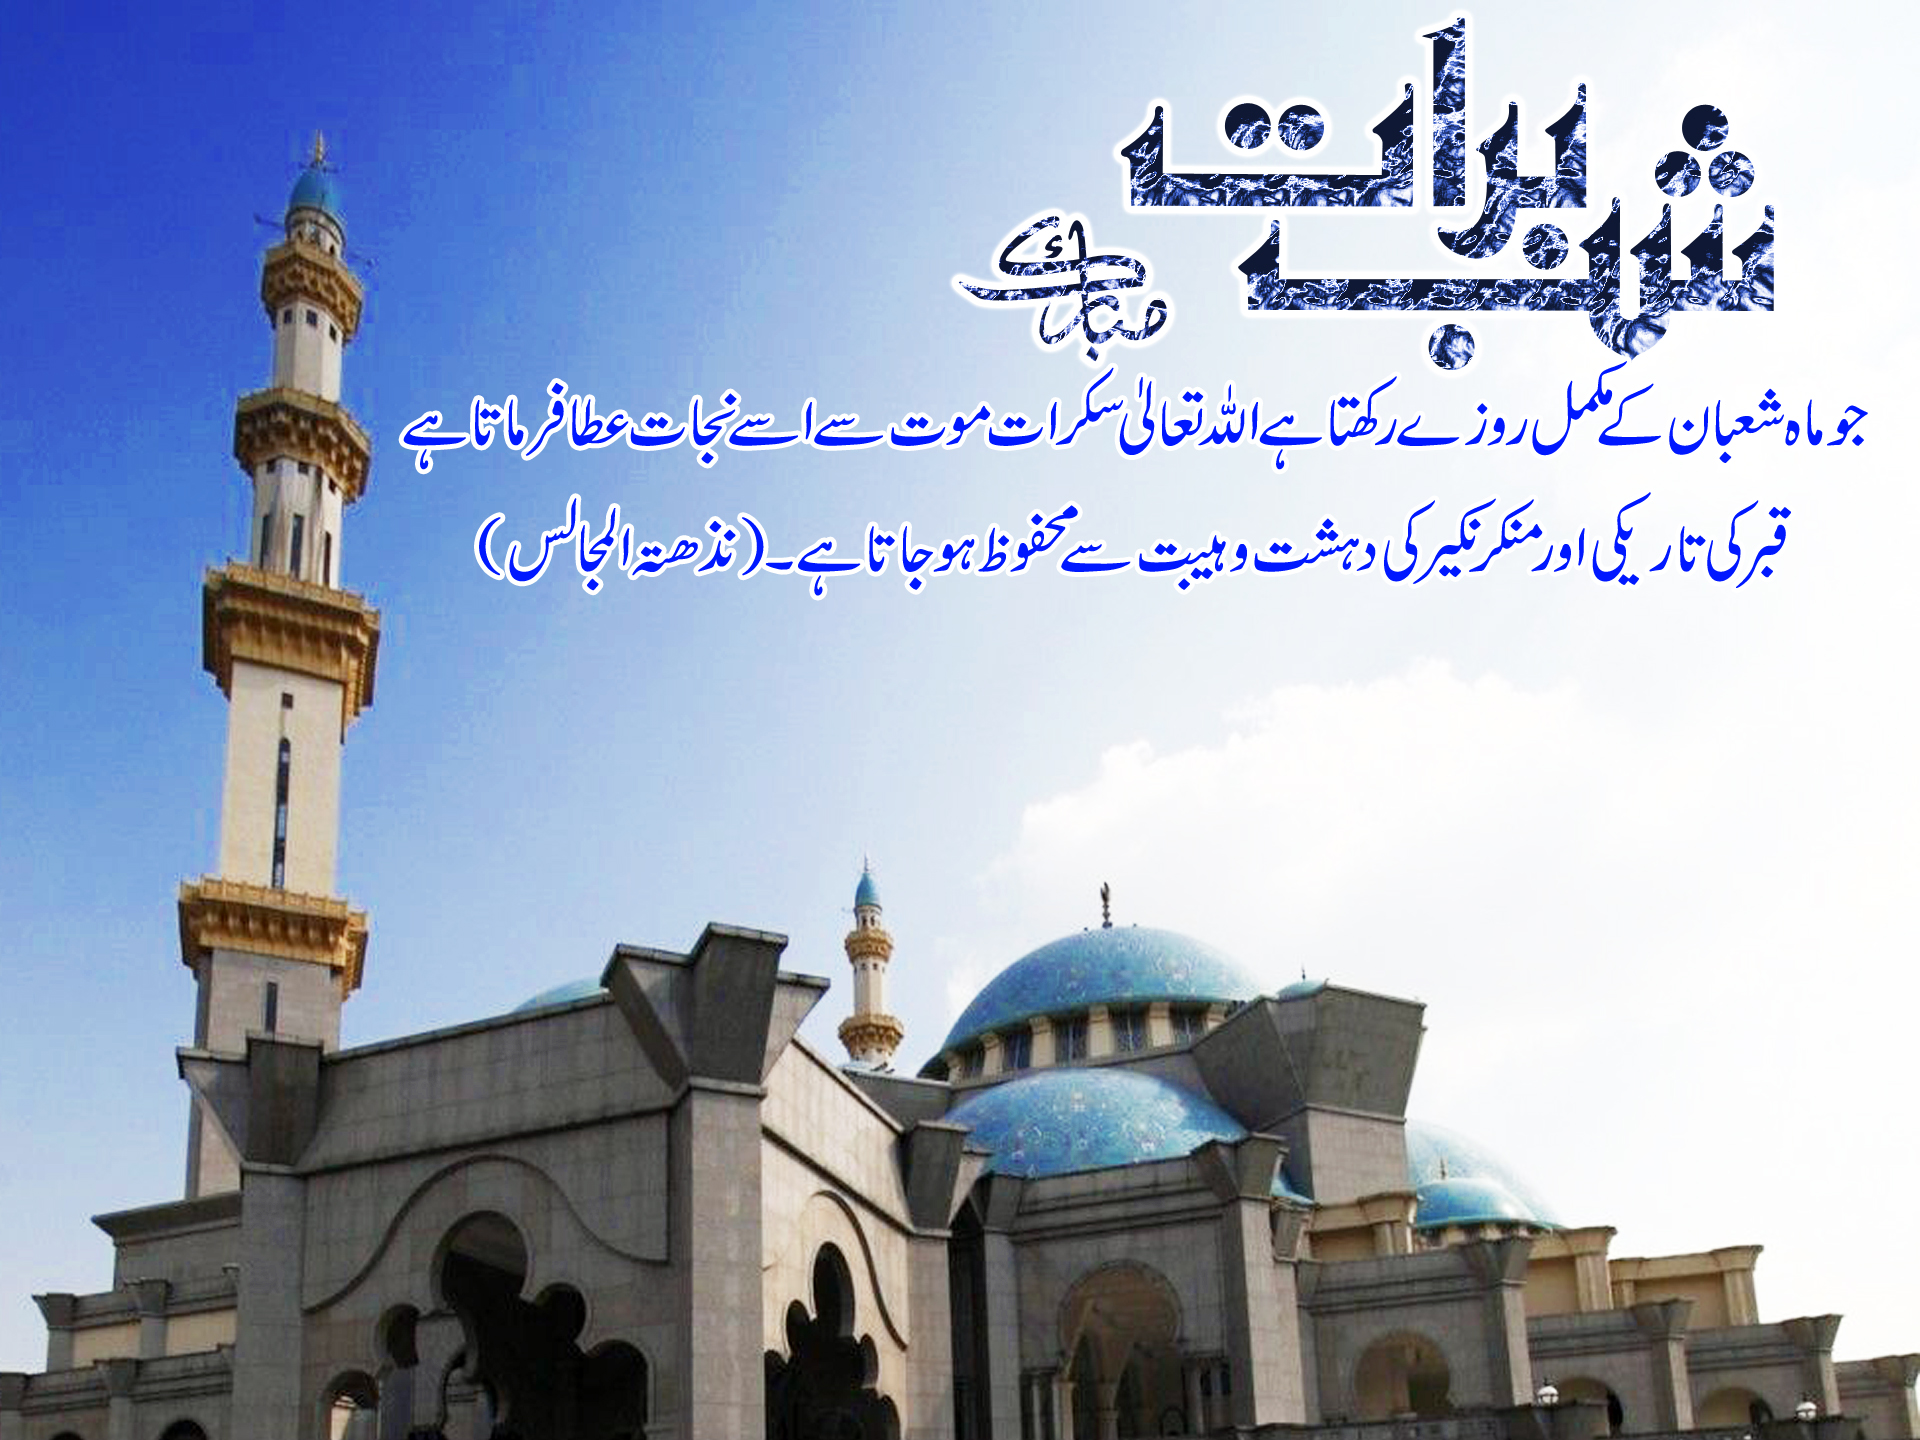 Shab-e-Barat Facebook Cover Pictures 2015